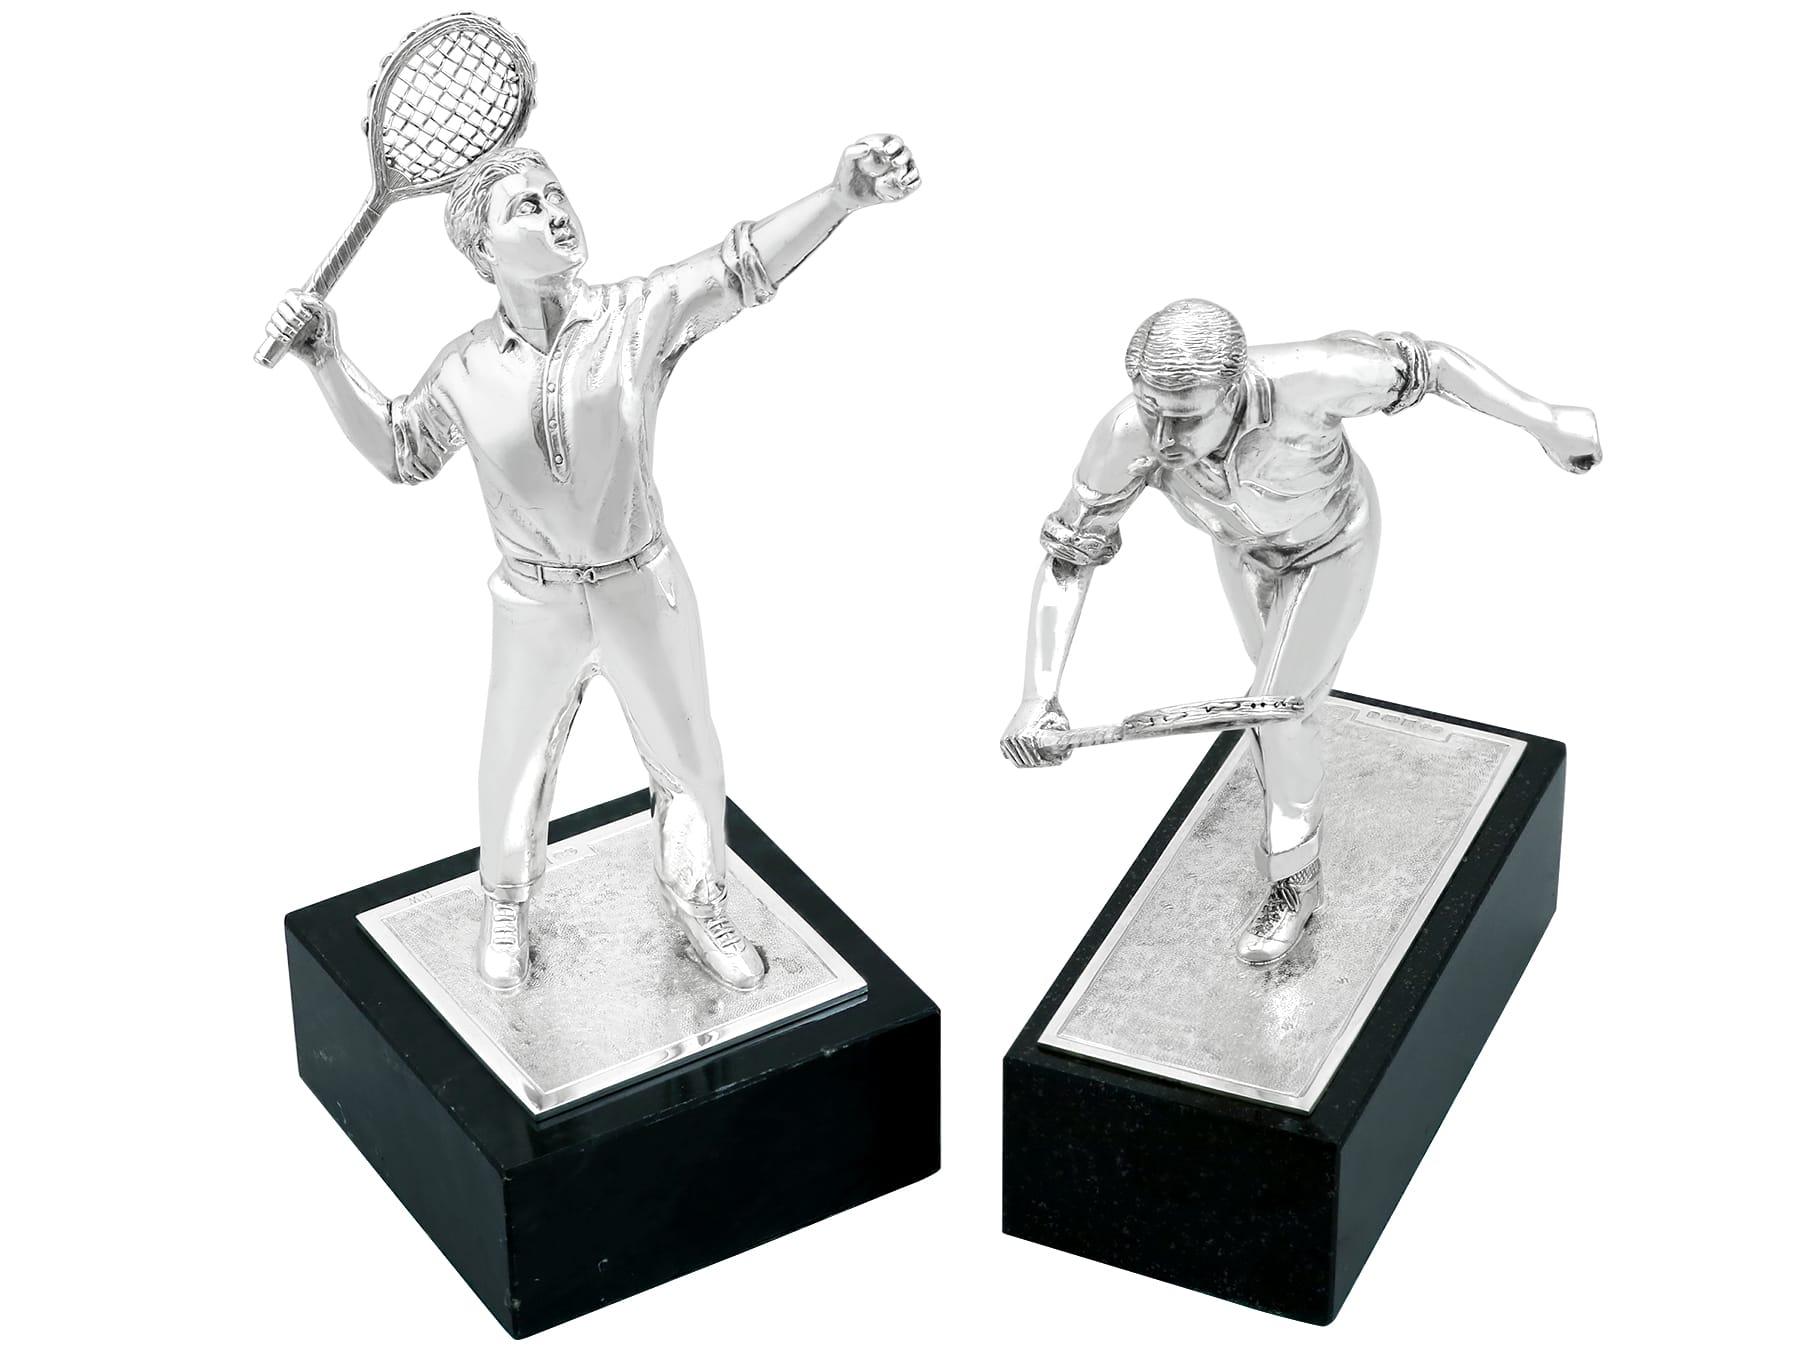 An exceptional, fine and impressive pair of vintage English cast sterling silver tennis trophies / presentation table ornaments; an addition to our ornamental silverware collection

These exceptional vintage cast sterling silver tennis